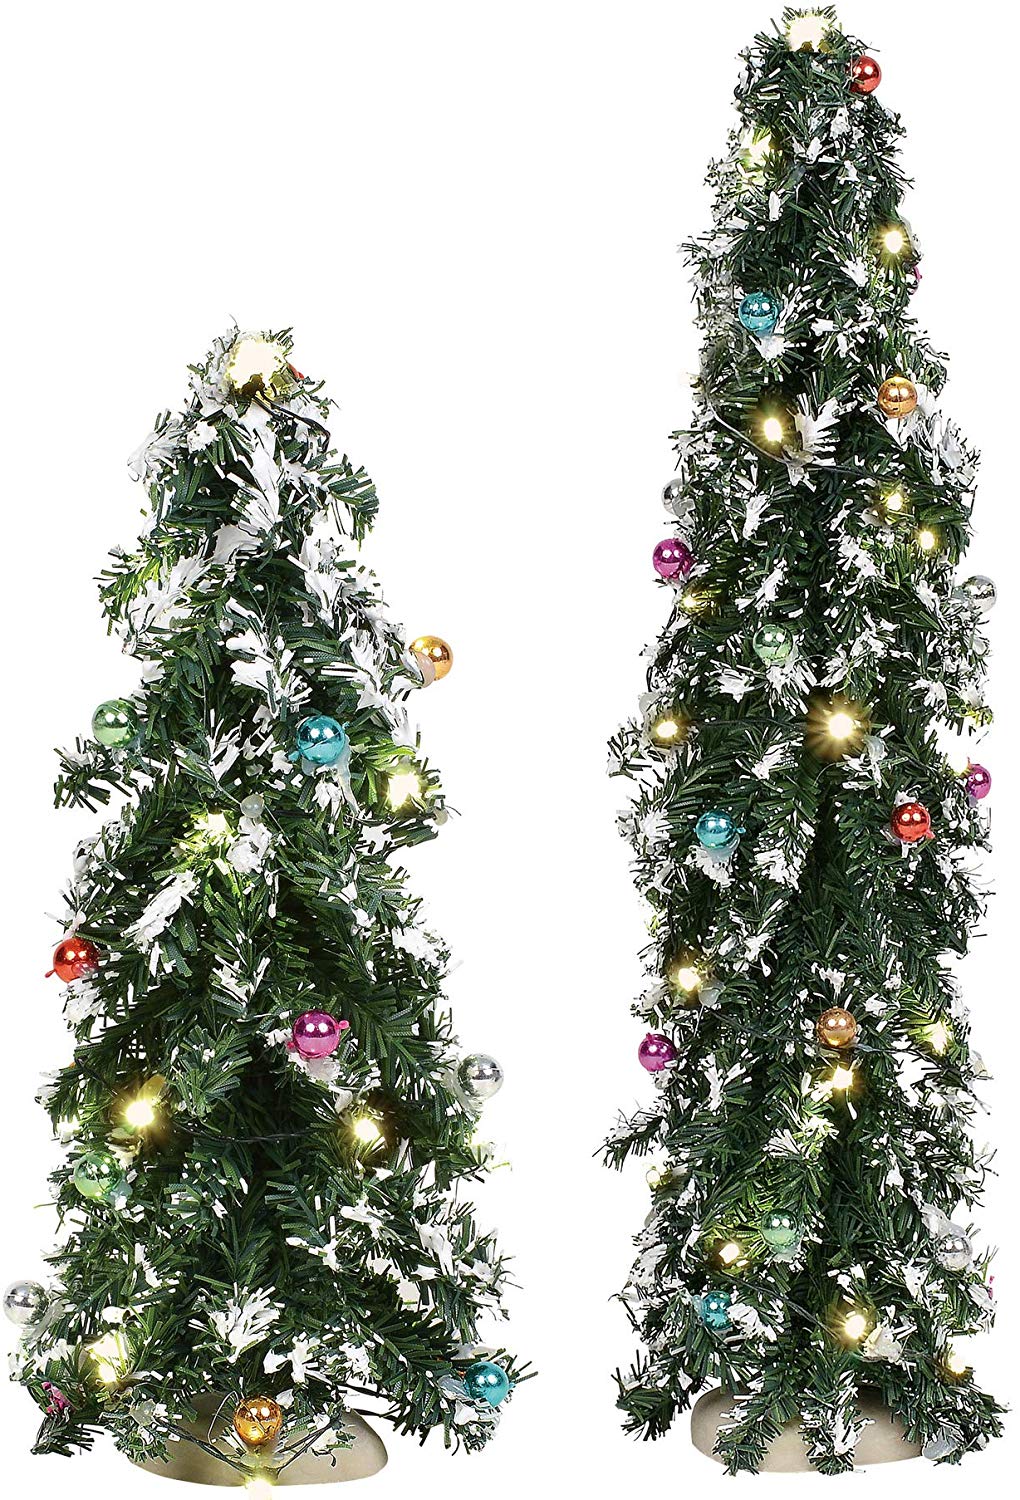 Department 56 Village Cross Product Accessories Festive Mountain Pine Trees with White Lights Lit Figurine Set, 8 and 14 Inch